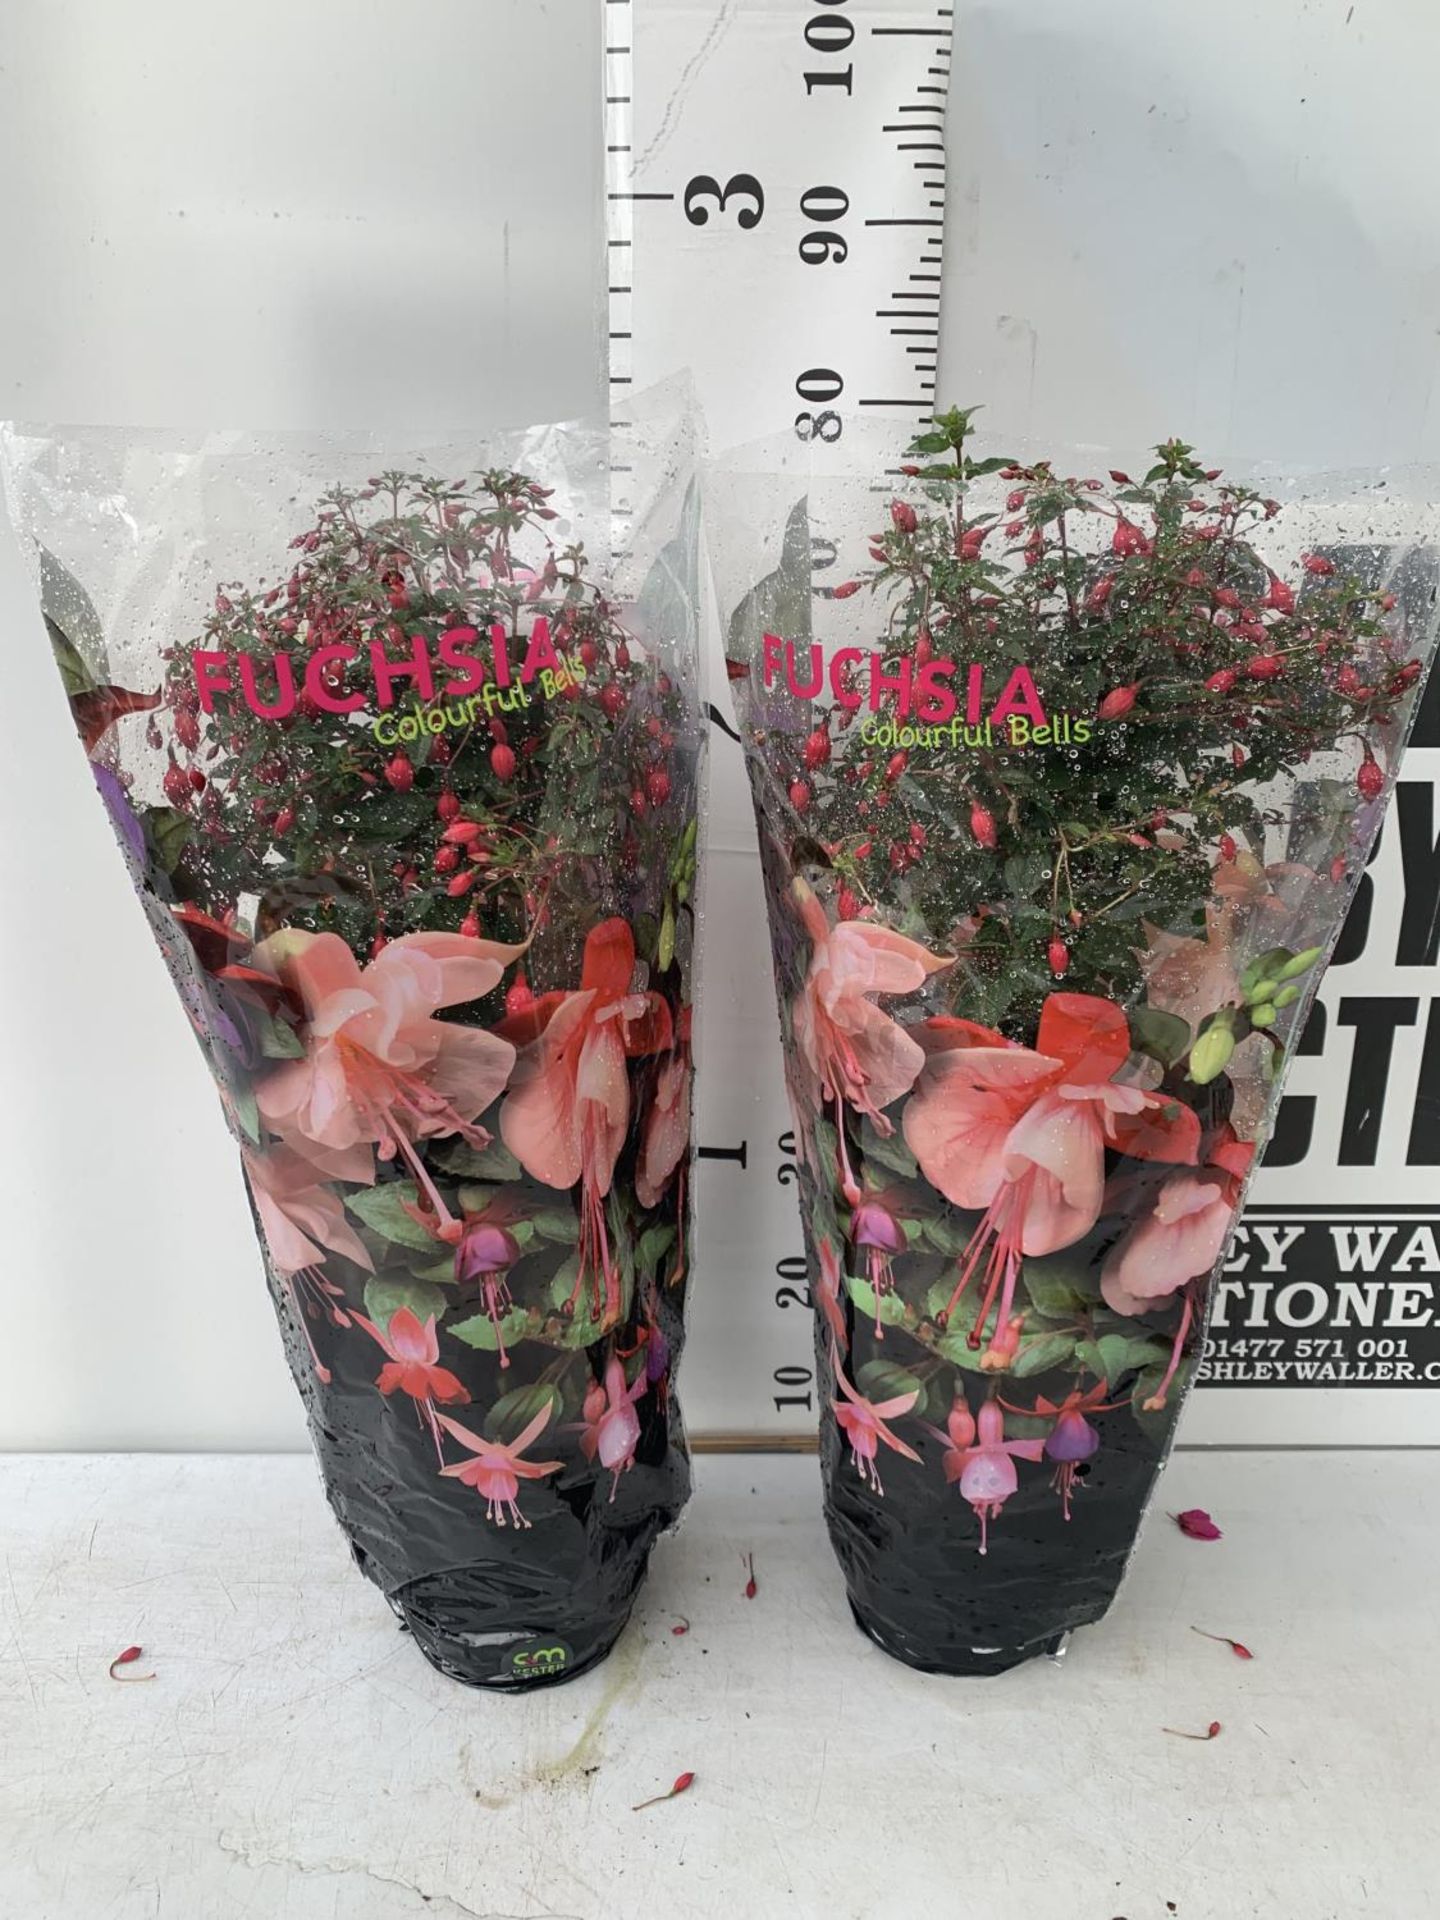 TWO BELLA STANDARD FUCHSIA IN A 3 LTR POTS 70CM -80CM TALL TO BE SOLD FOR THE TWO PLUS VAT - Bild 5 aus 5